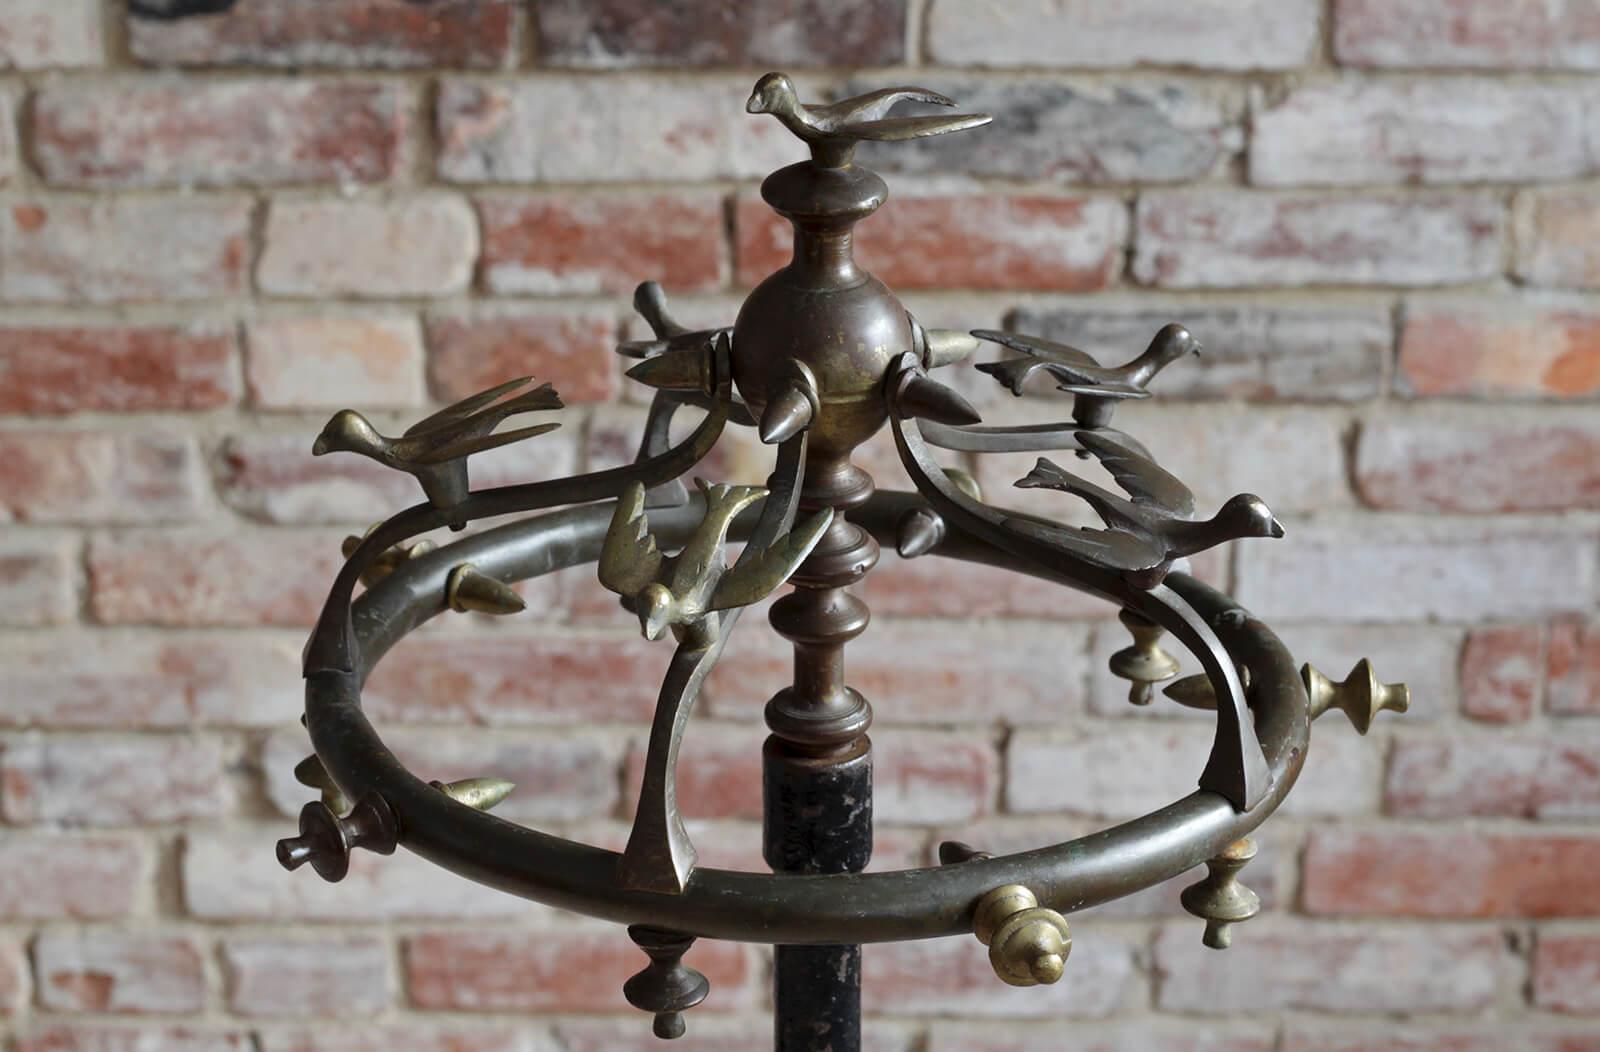 This is a unique and very original coat rack. The base is stamped by Seecol Company - Strand Electric & Engineering Co. and probably comes from early 20th Century. It is made of cast iron which provides high stability due to its weight. Extremely